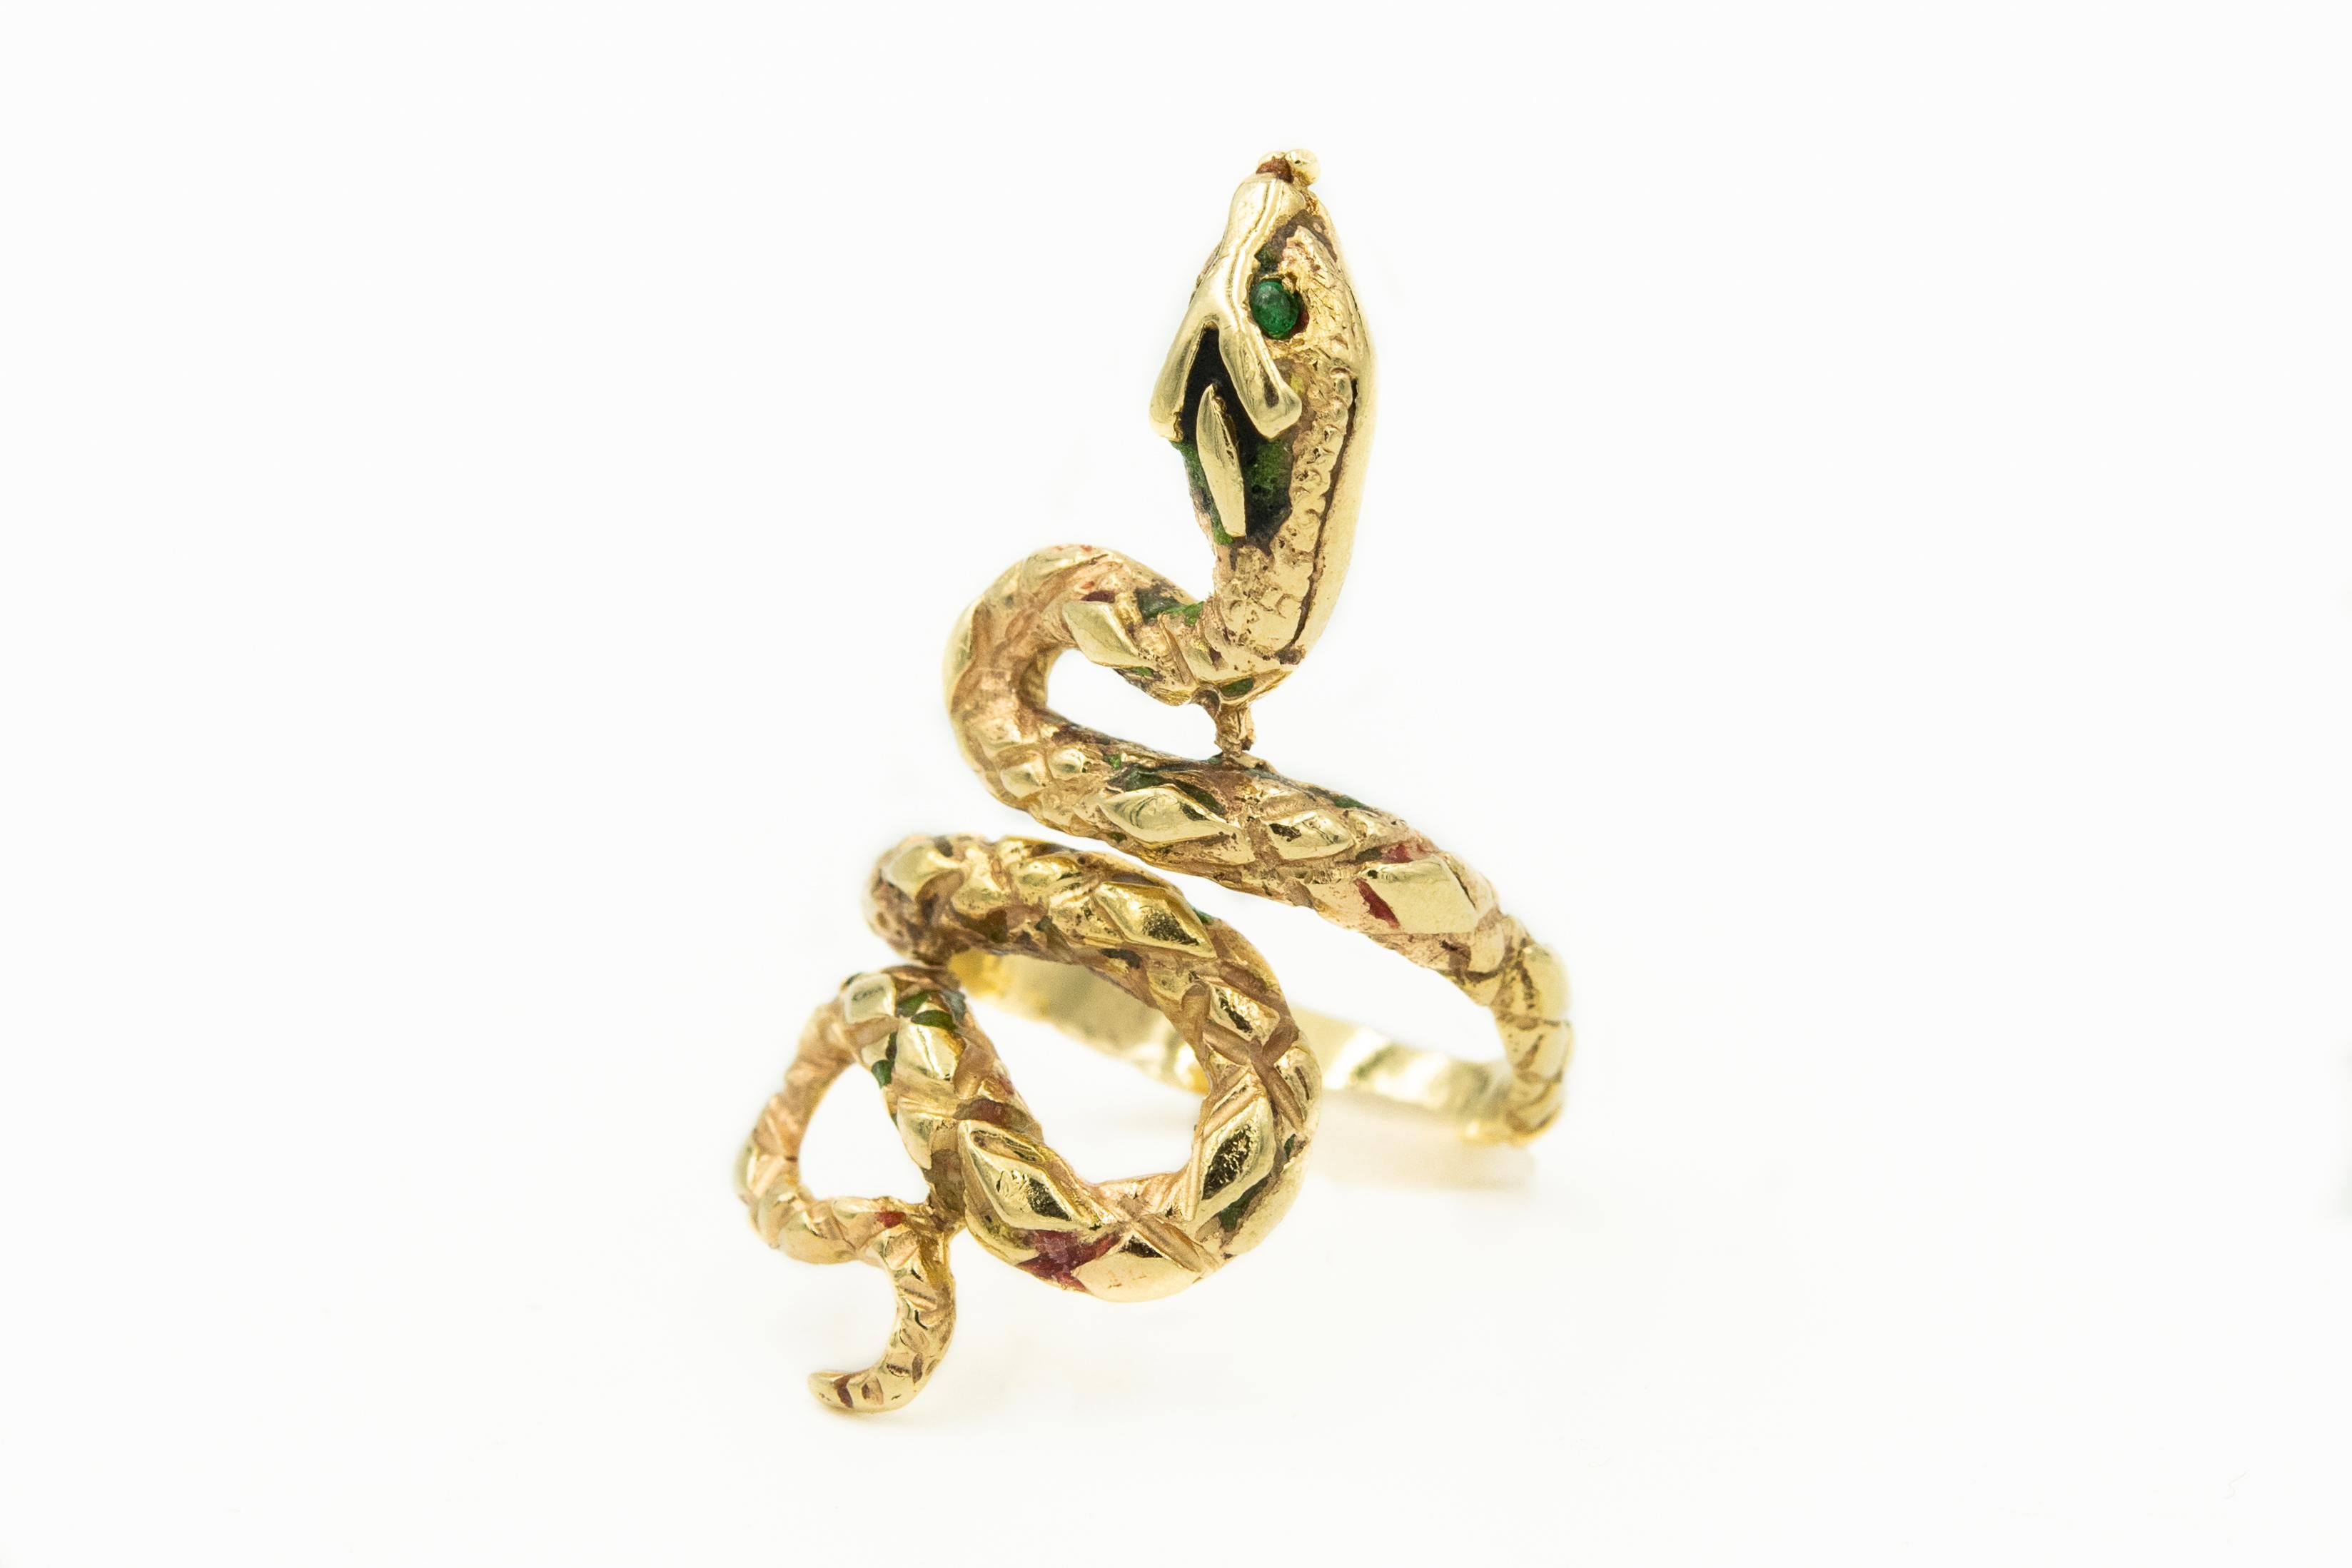 Elongated snake ring featuring a diamond pattern design along its back.  The head has green enamel and emerald eyes on a 14k yellow gold body.  Originally the body had enamel but over the years it has worn off.
US size 7